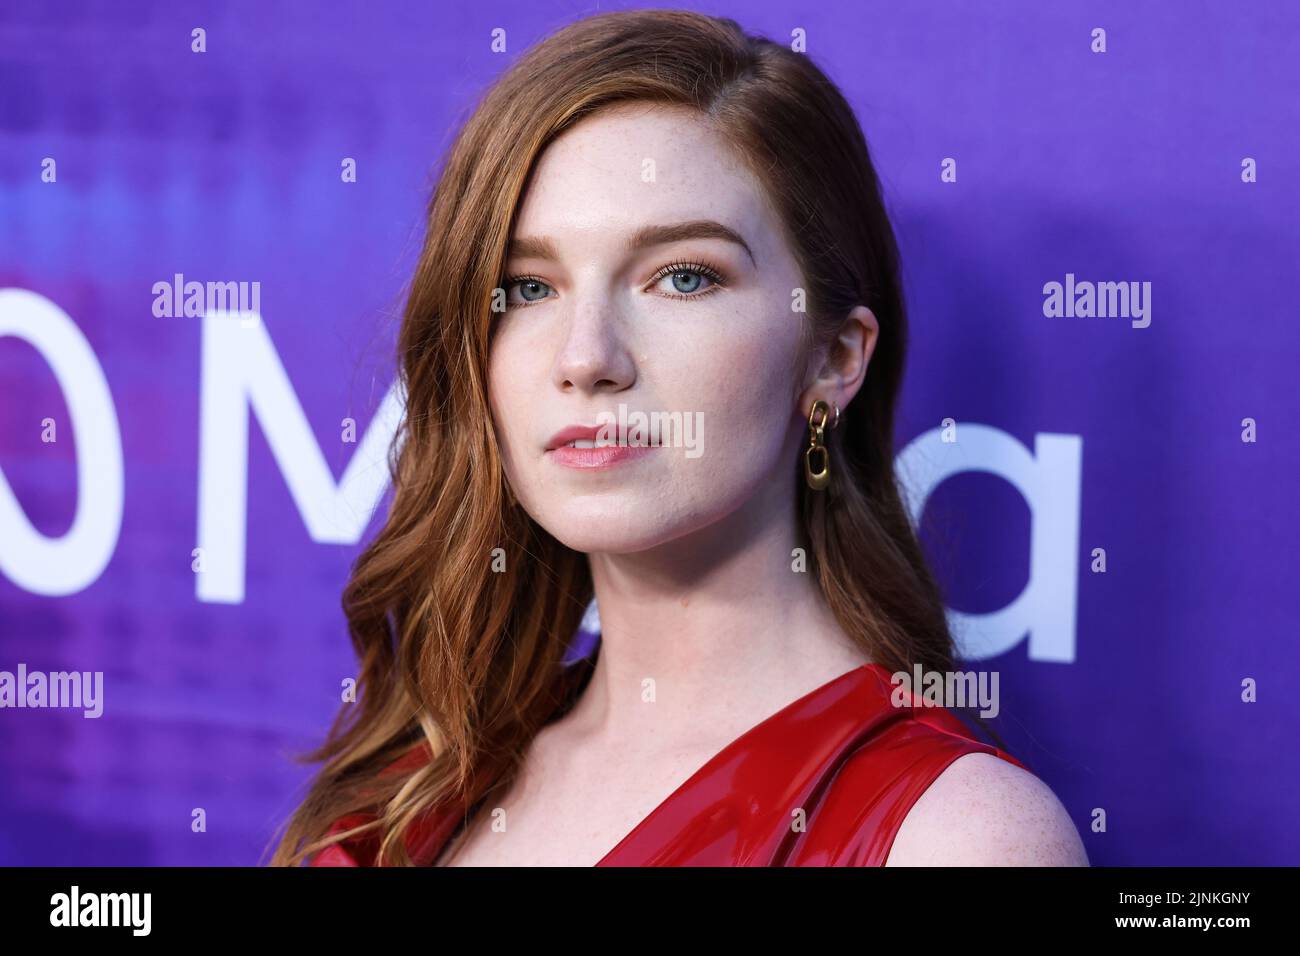 HOLLYWOOD, LOS ANGELES, CALIFORNIA, USA - AUGUST 11: American actress Annalise Basso arrives at the Variety 2022 Power Of Young Hollywood Celebration Presented By Facebook Gaming held at NeueHouse Los Angeles on August 11, 2022 in Hollywood, Los Angeles, California, United States. (Photo by Xavier Collin/Image Press Agency) Stock Photo